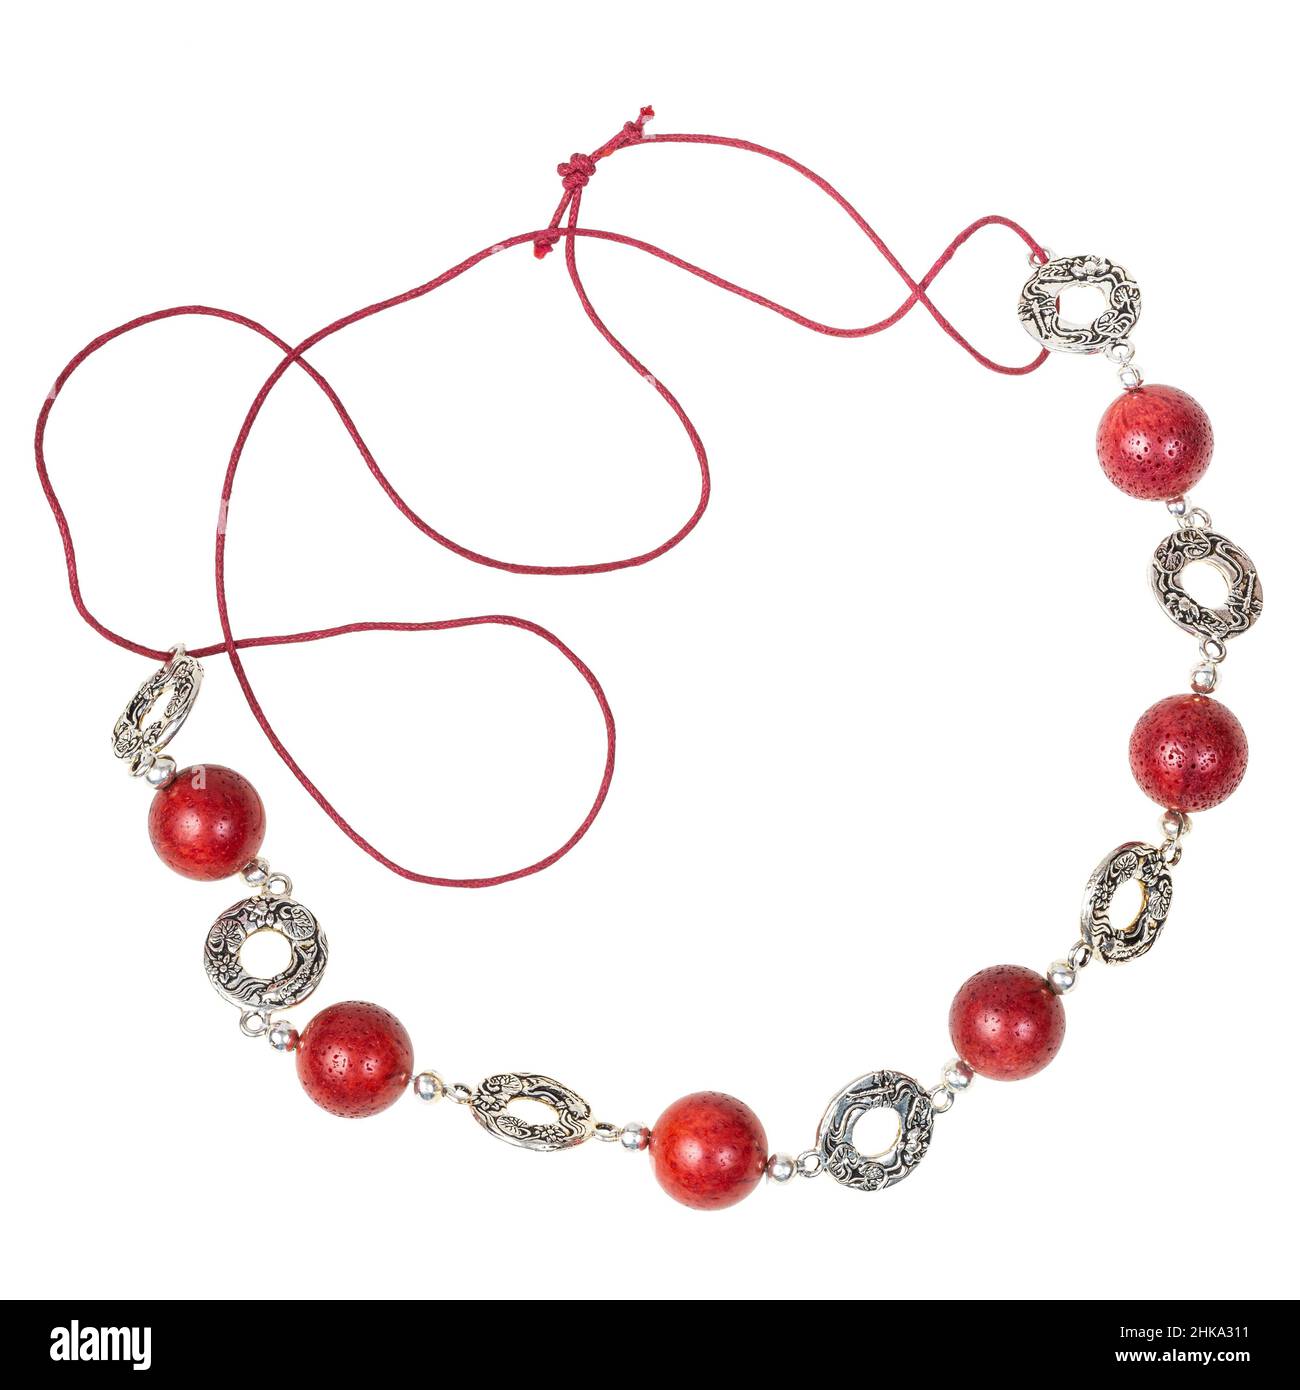 handcrafted necklace of polished red coral balls and decorated silver rings on red leather cord isolated on white backhround Stock Photo